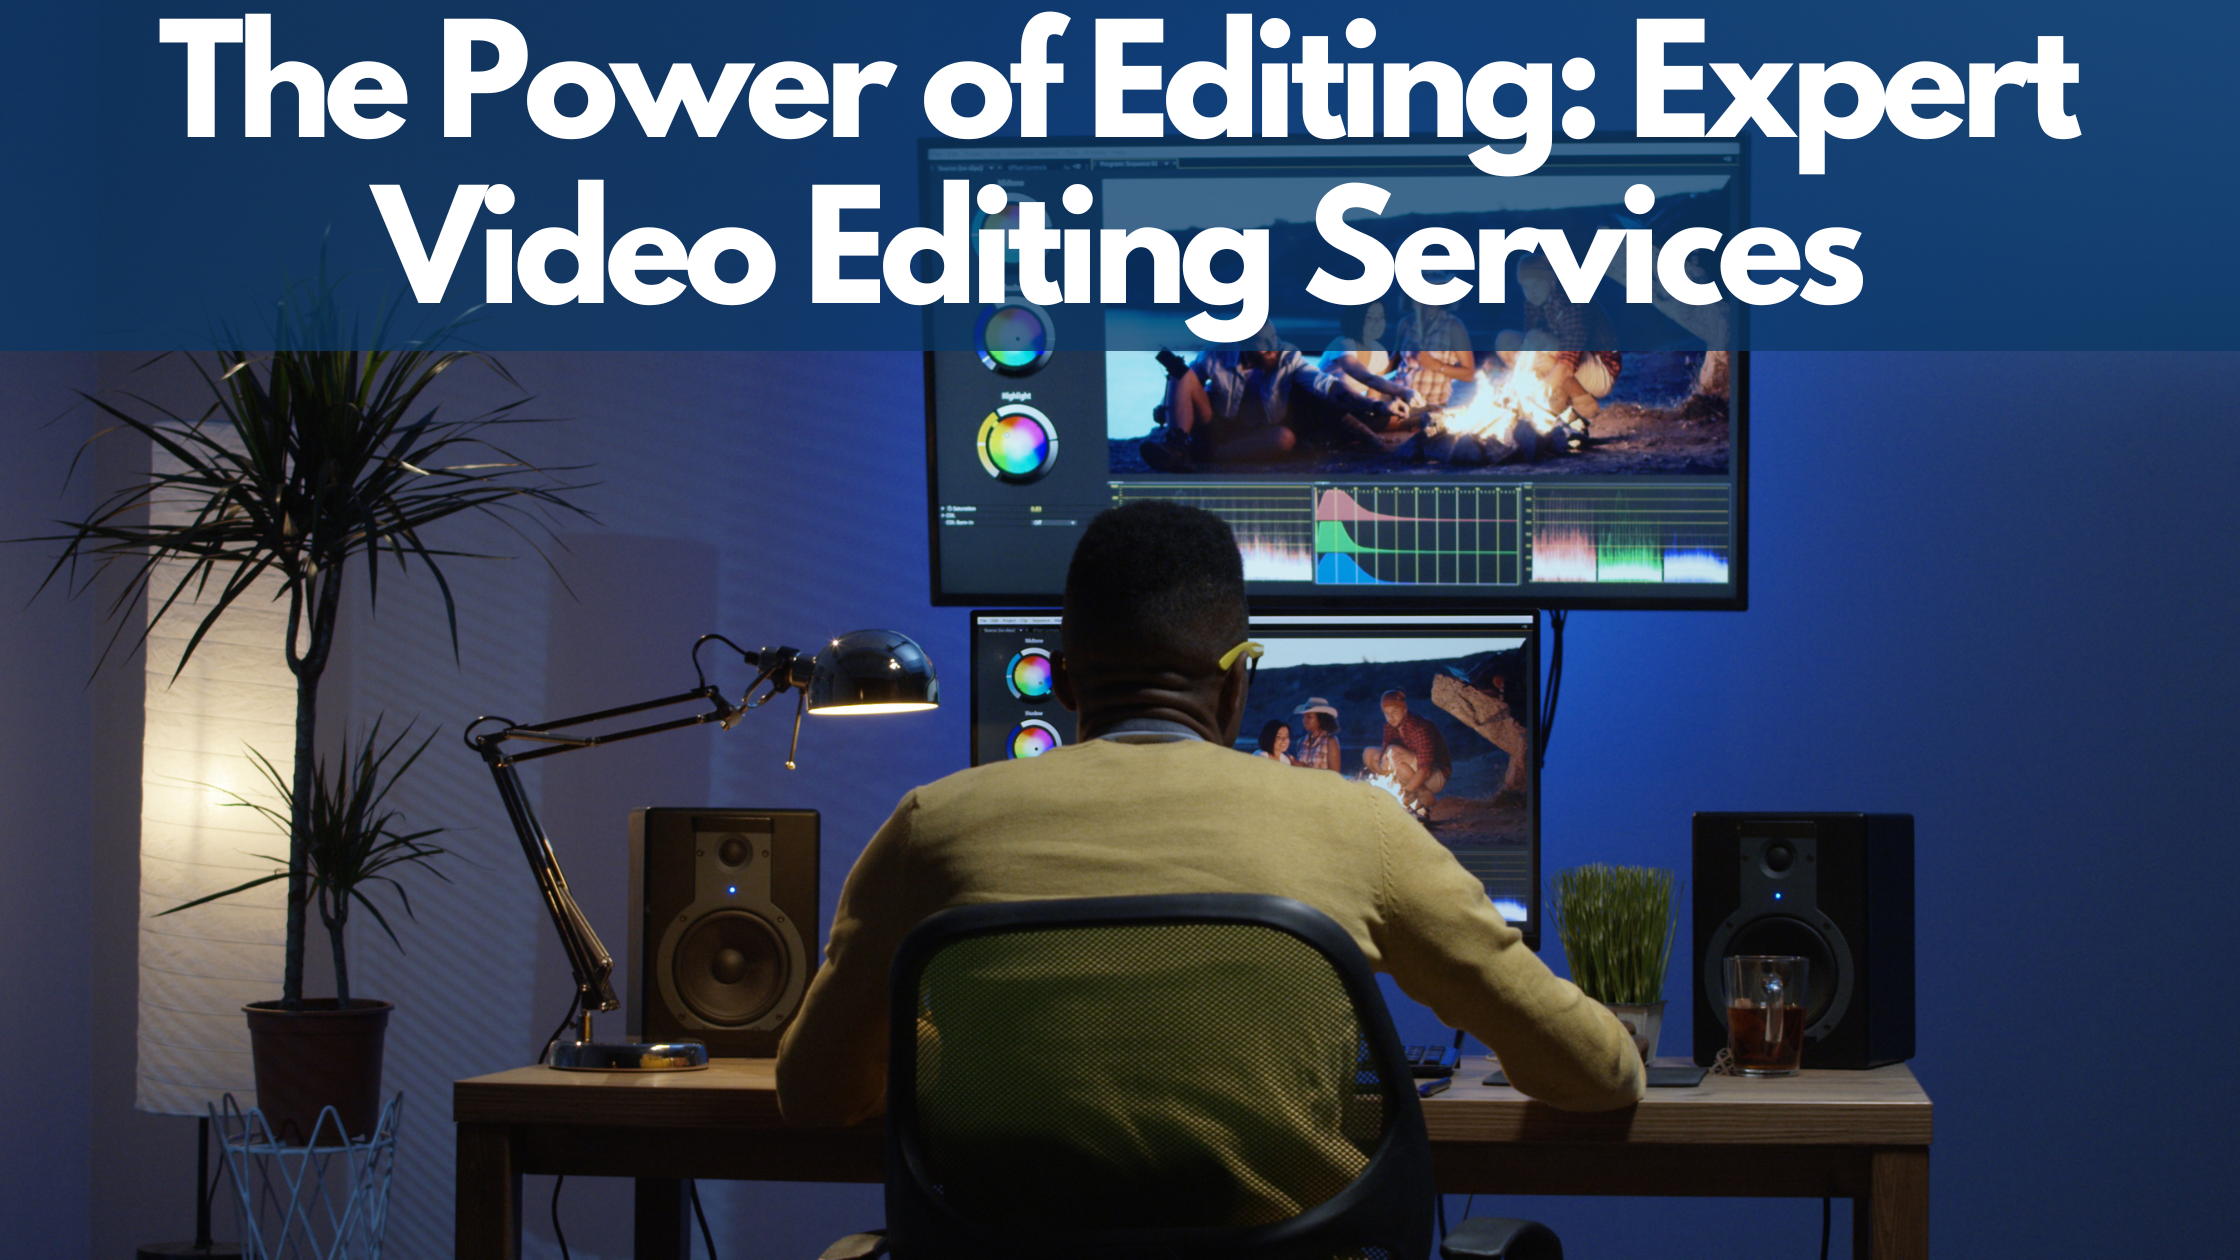 The Power of Editing: Expert Video Editing Services